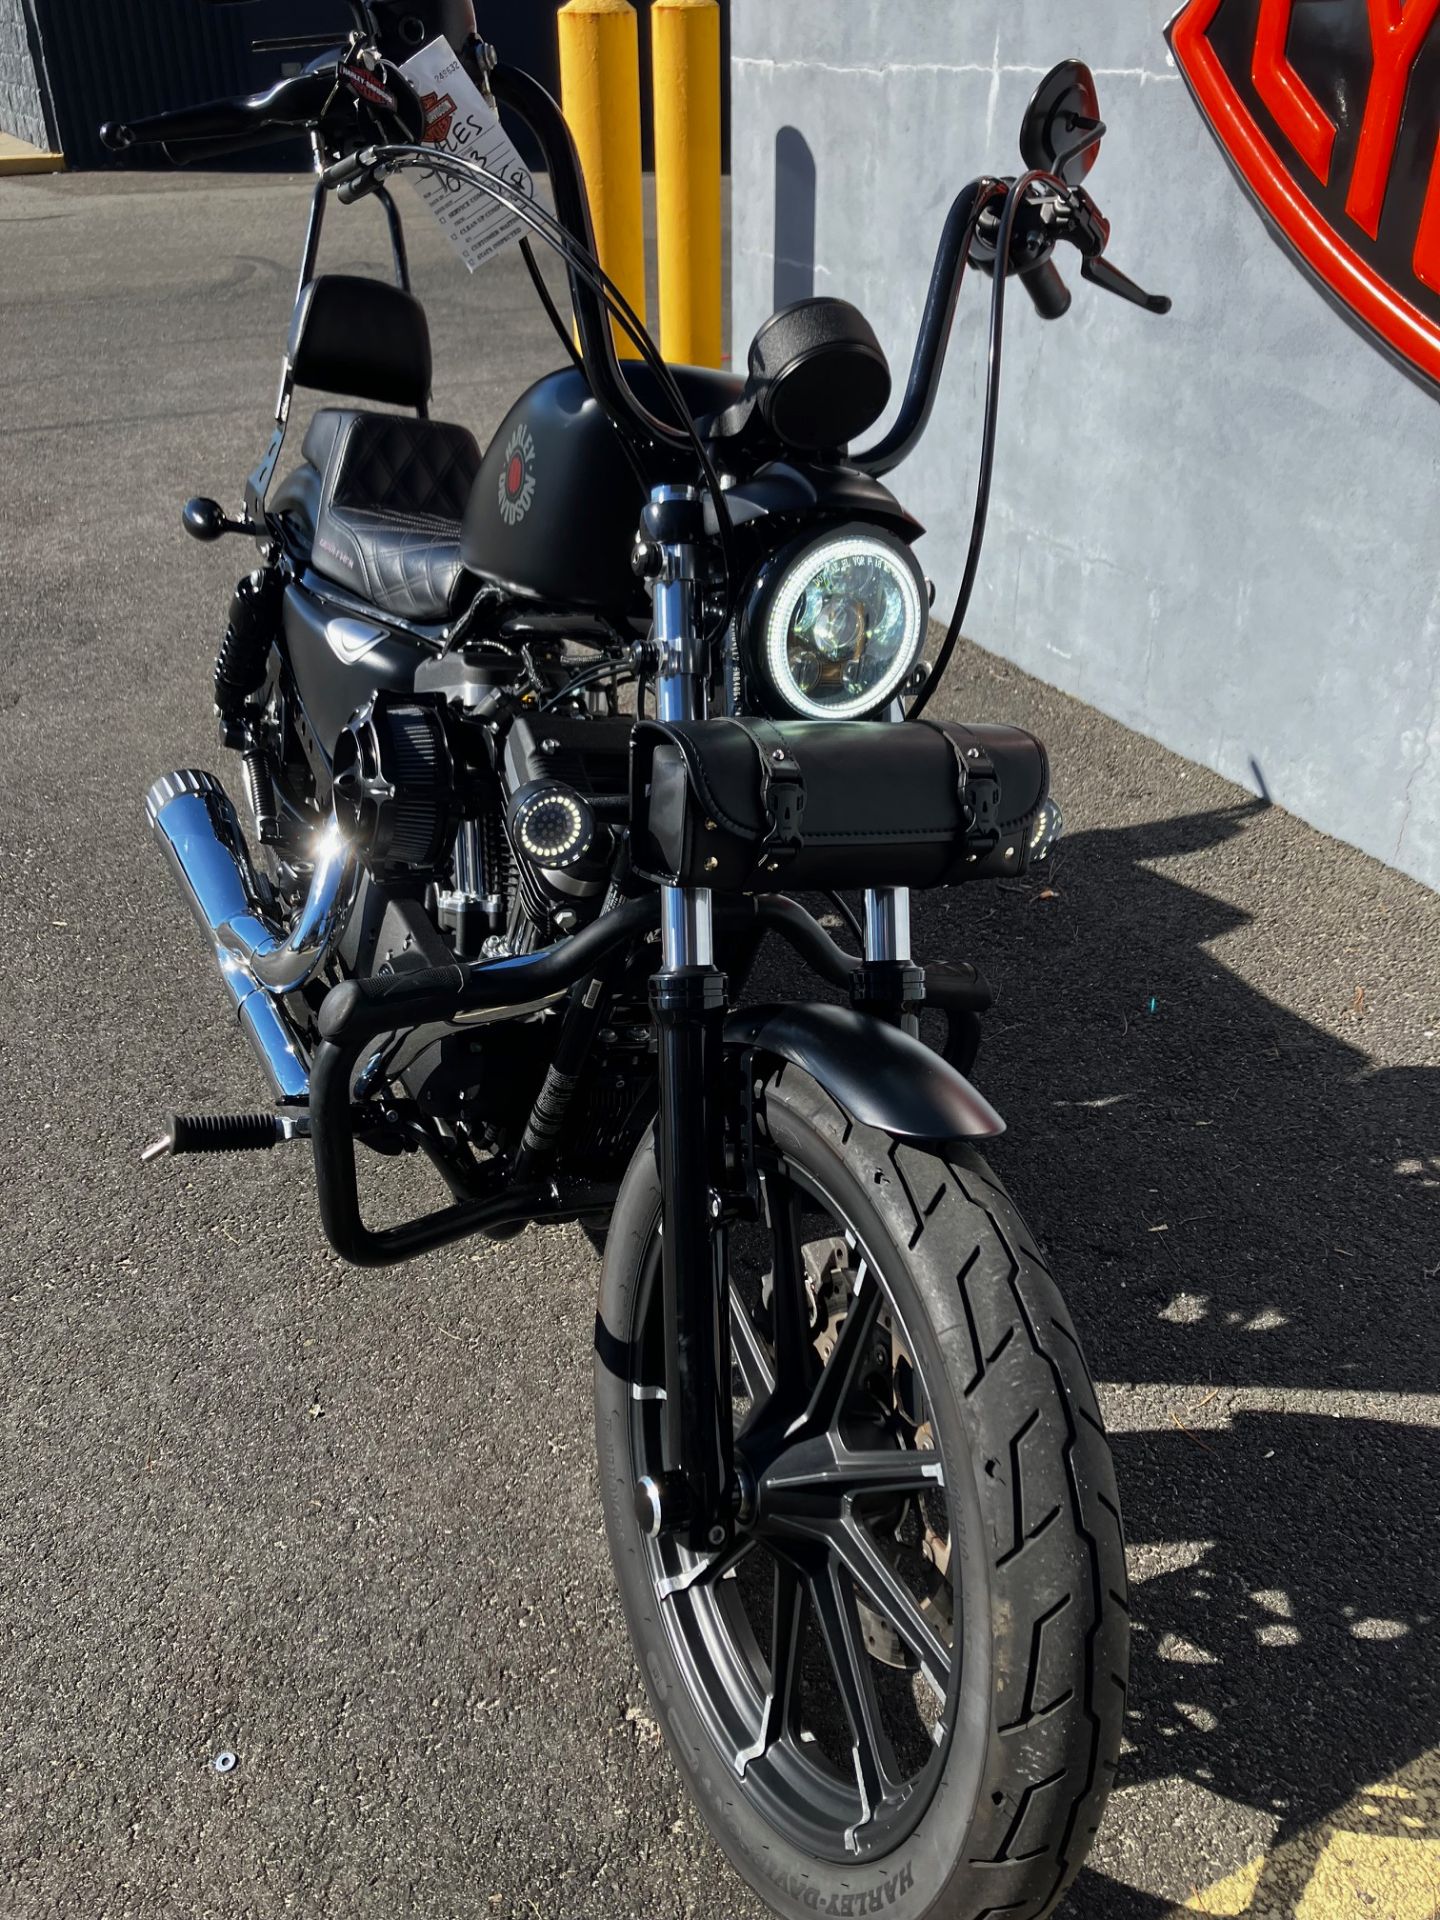 2022 Harley-Davidson IRON 883 (1200R CONVERSION) in West Long Branch, New Jersey - Photo 2